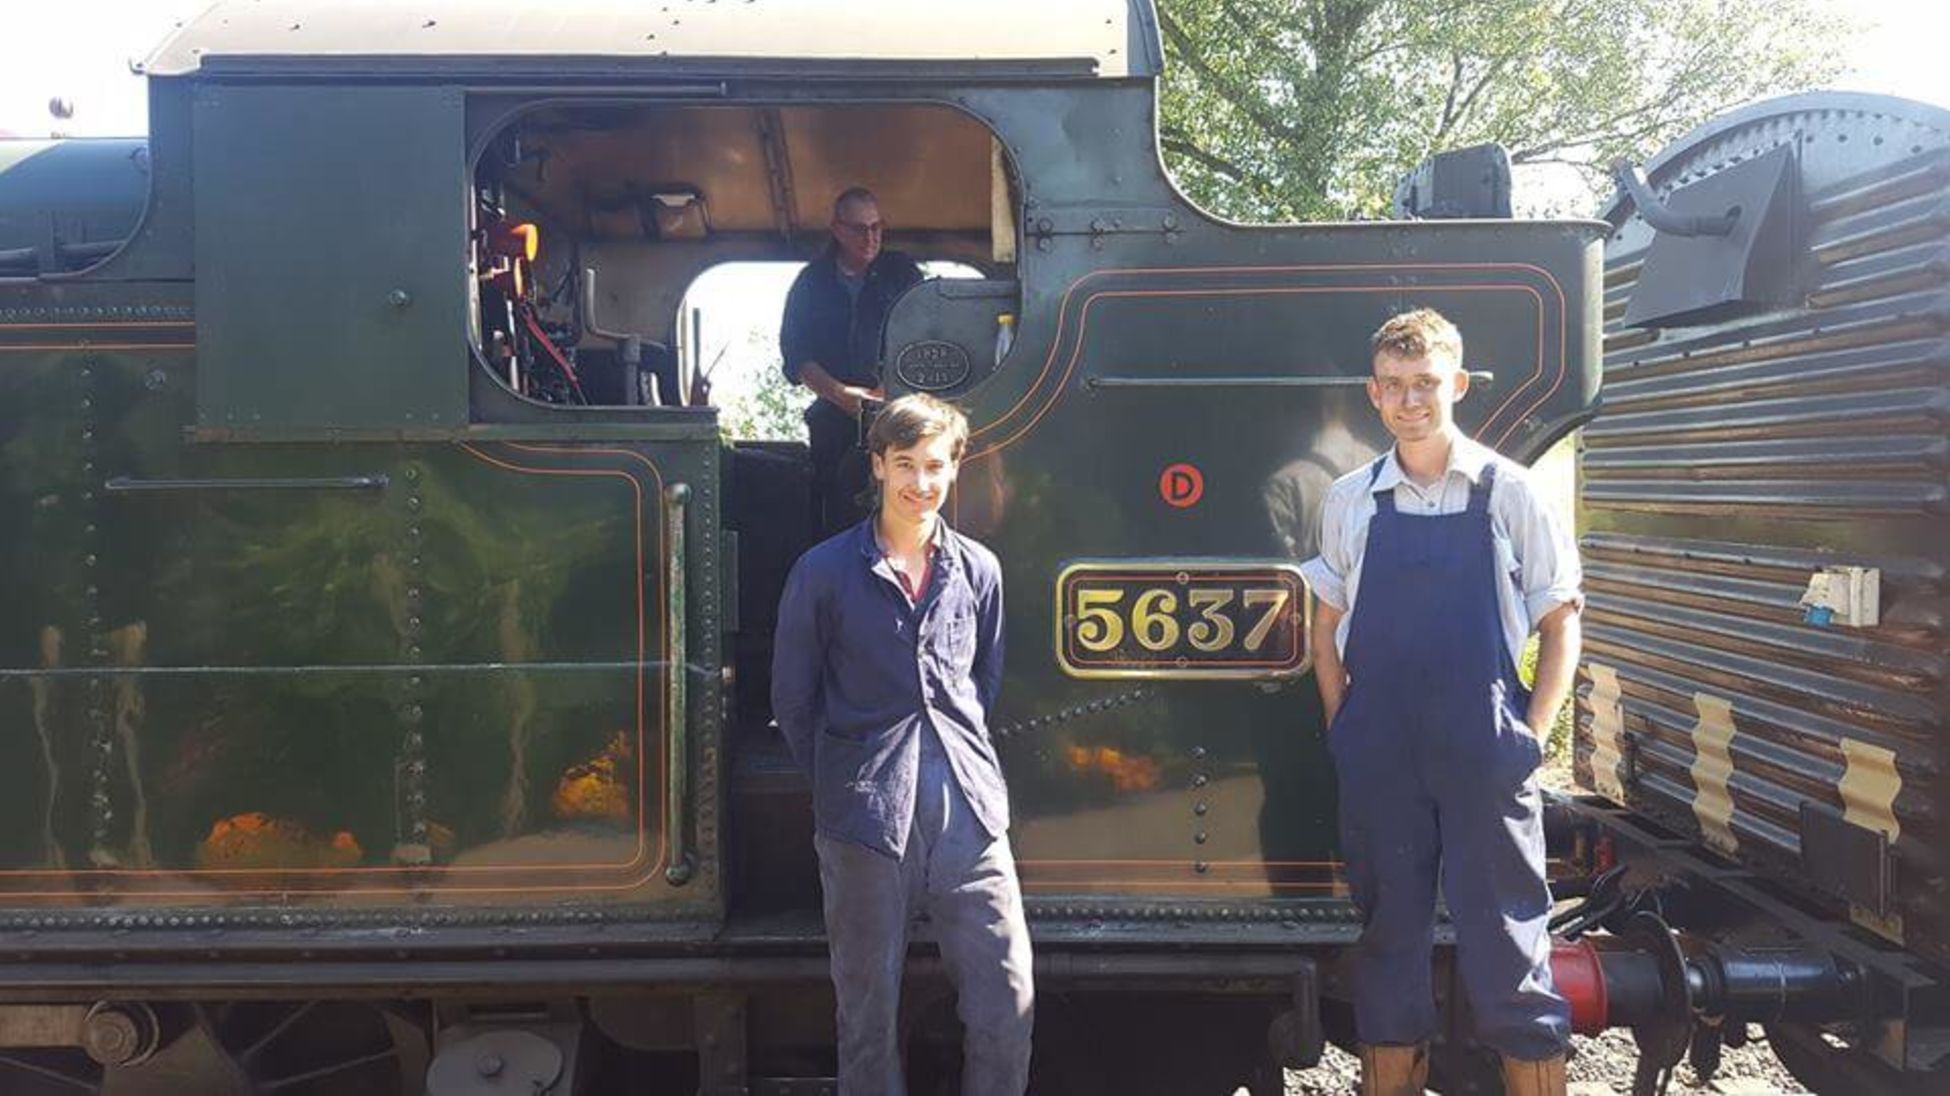 Two volunteers in front of an locomotive